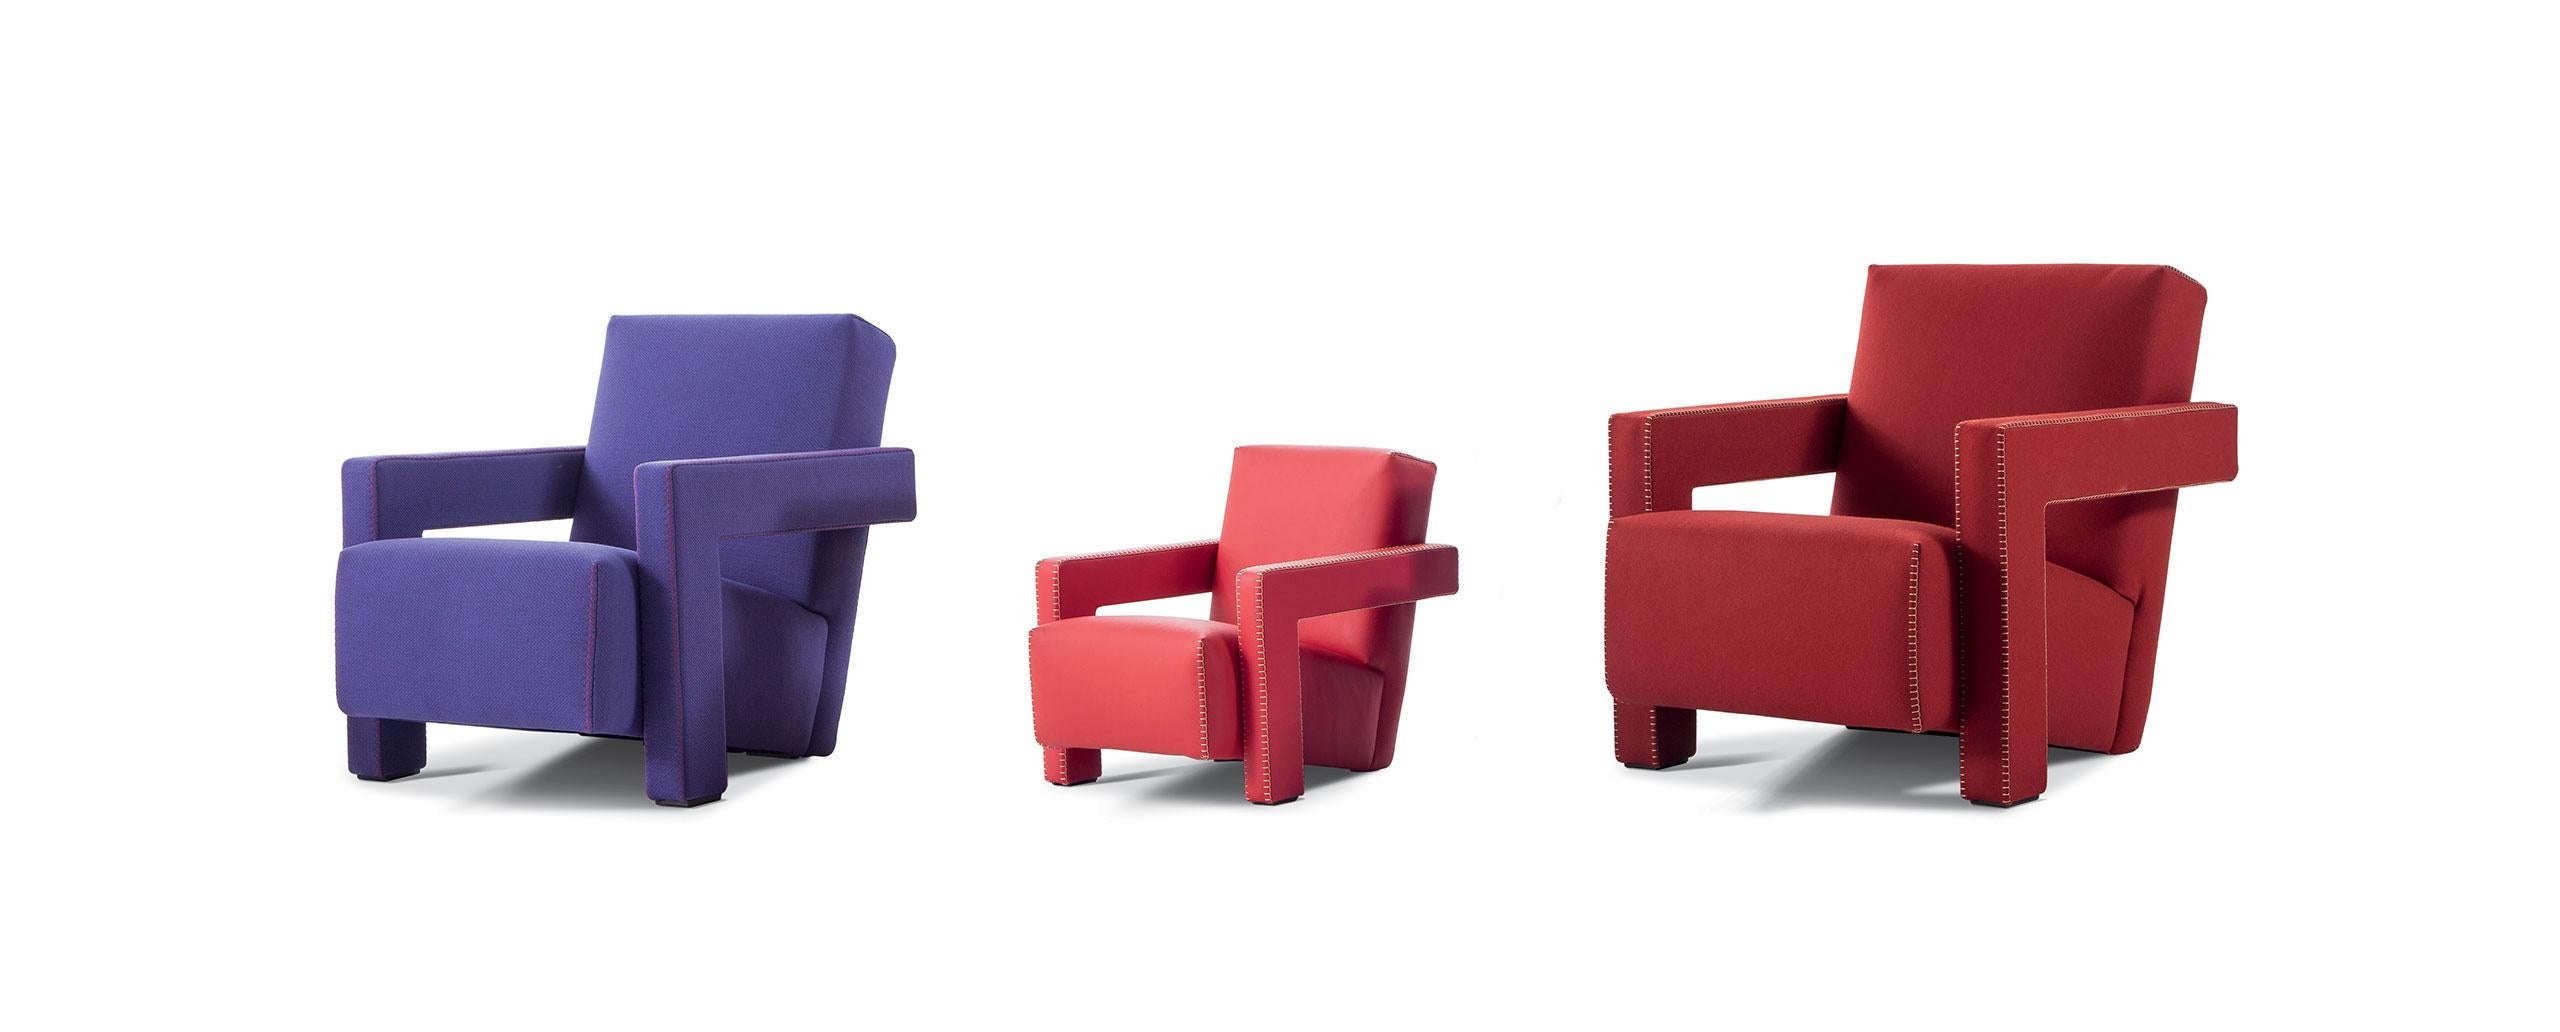 Armchair designed by Gerrit Thomas Rietveld in 1935. Relaunched in 2015.
Manufactured by Cassina in Italy.

Cassina offers a new reinterpretation of the iconic model dated 1935: it is a new version, with reduced sizes to be ergonomically suited